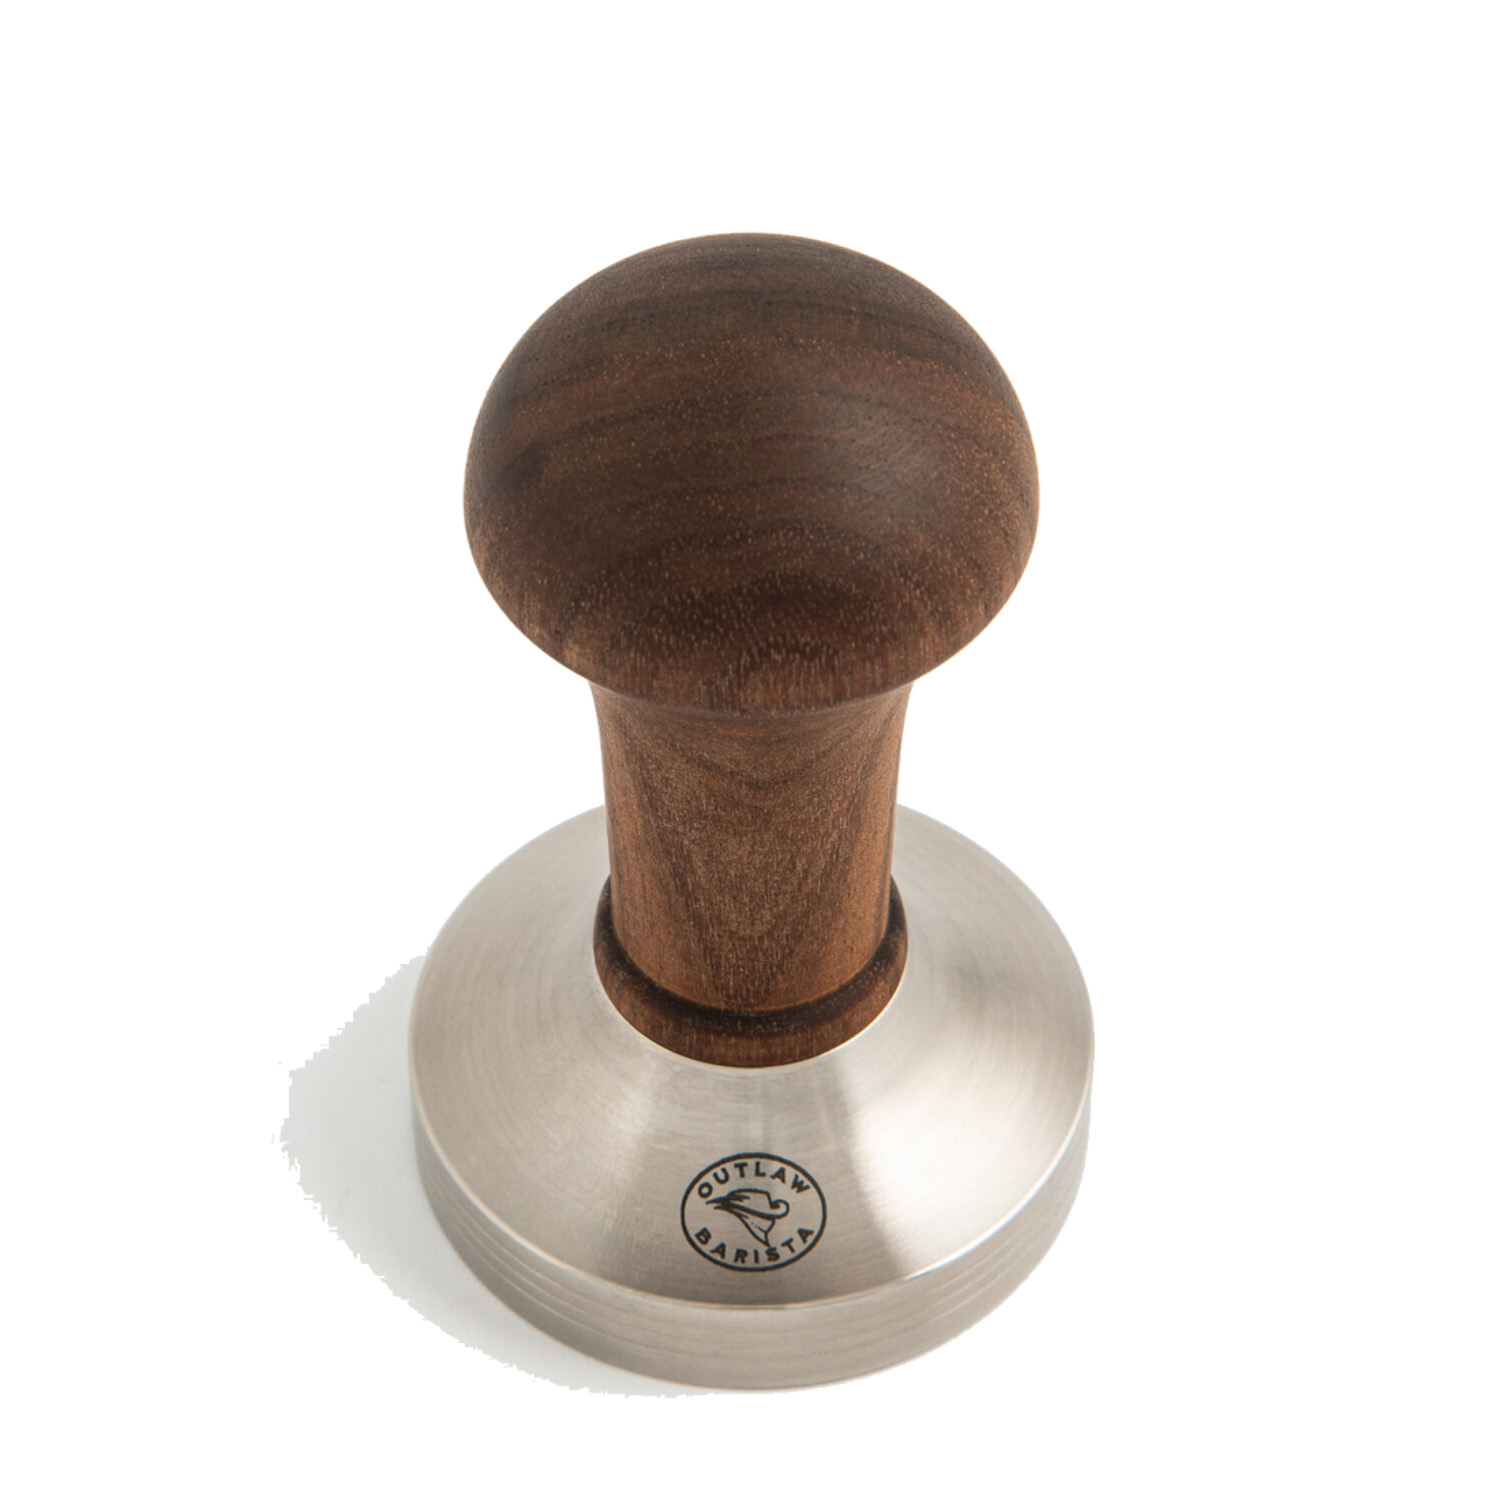 Otto Hauck - Outlaw Barista Tamper, 54,4mm